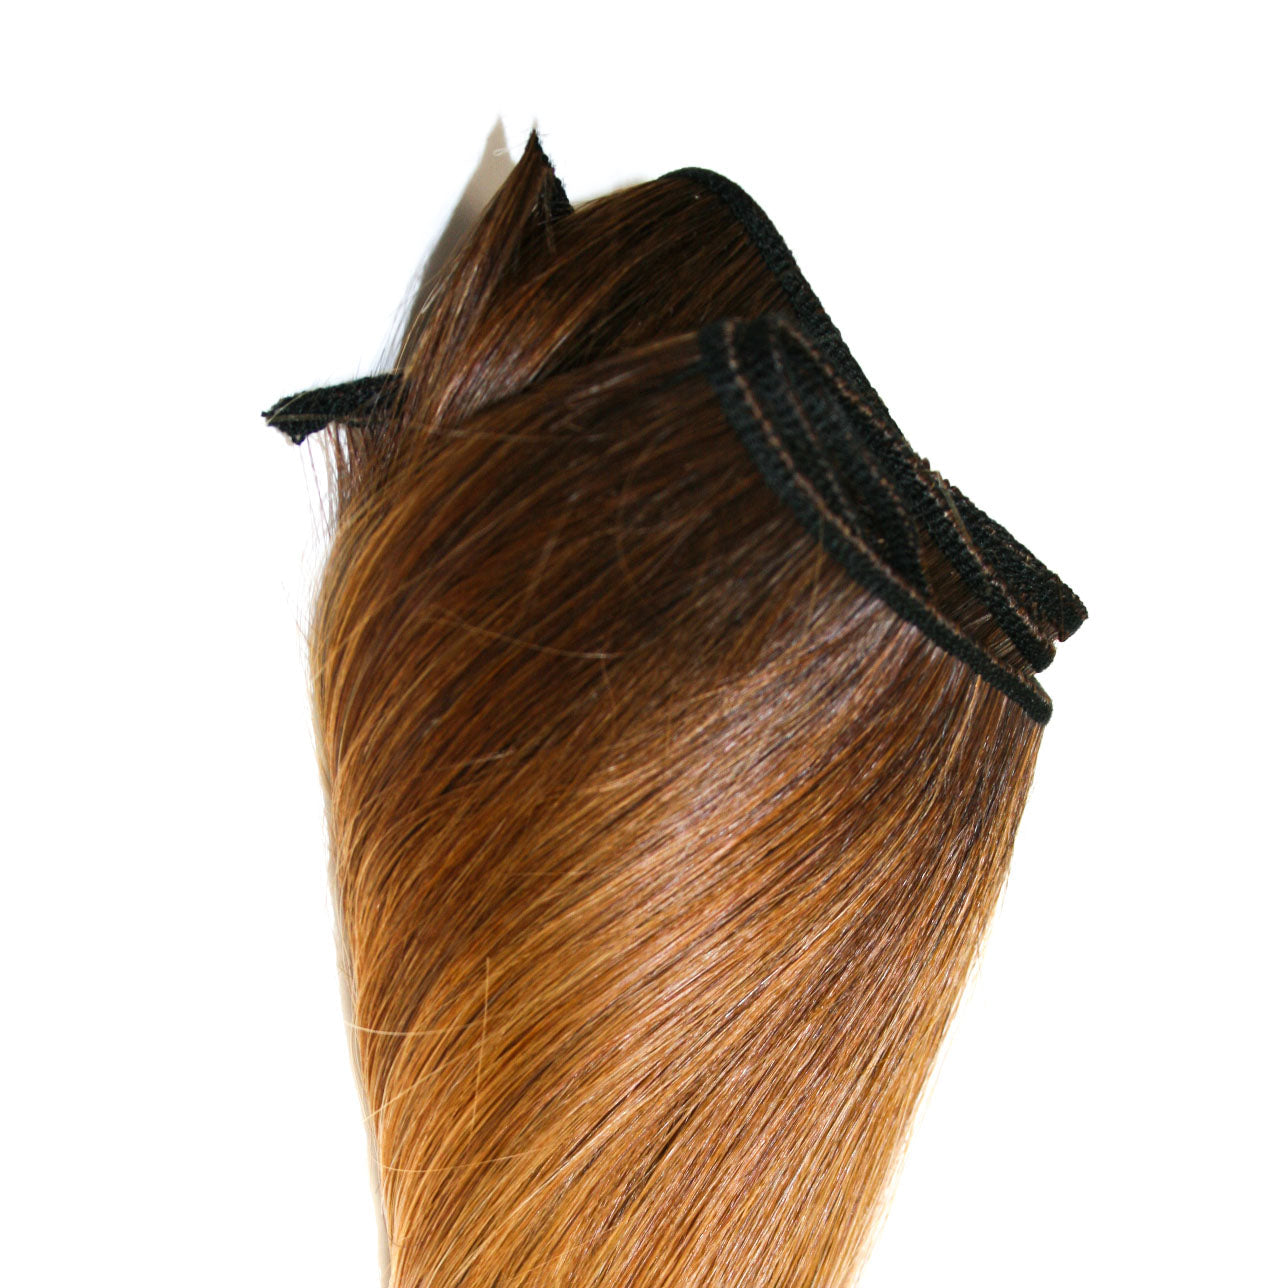 Wefted human hair extensions. Medium blonde hair with dark hair roots.